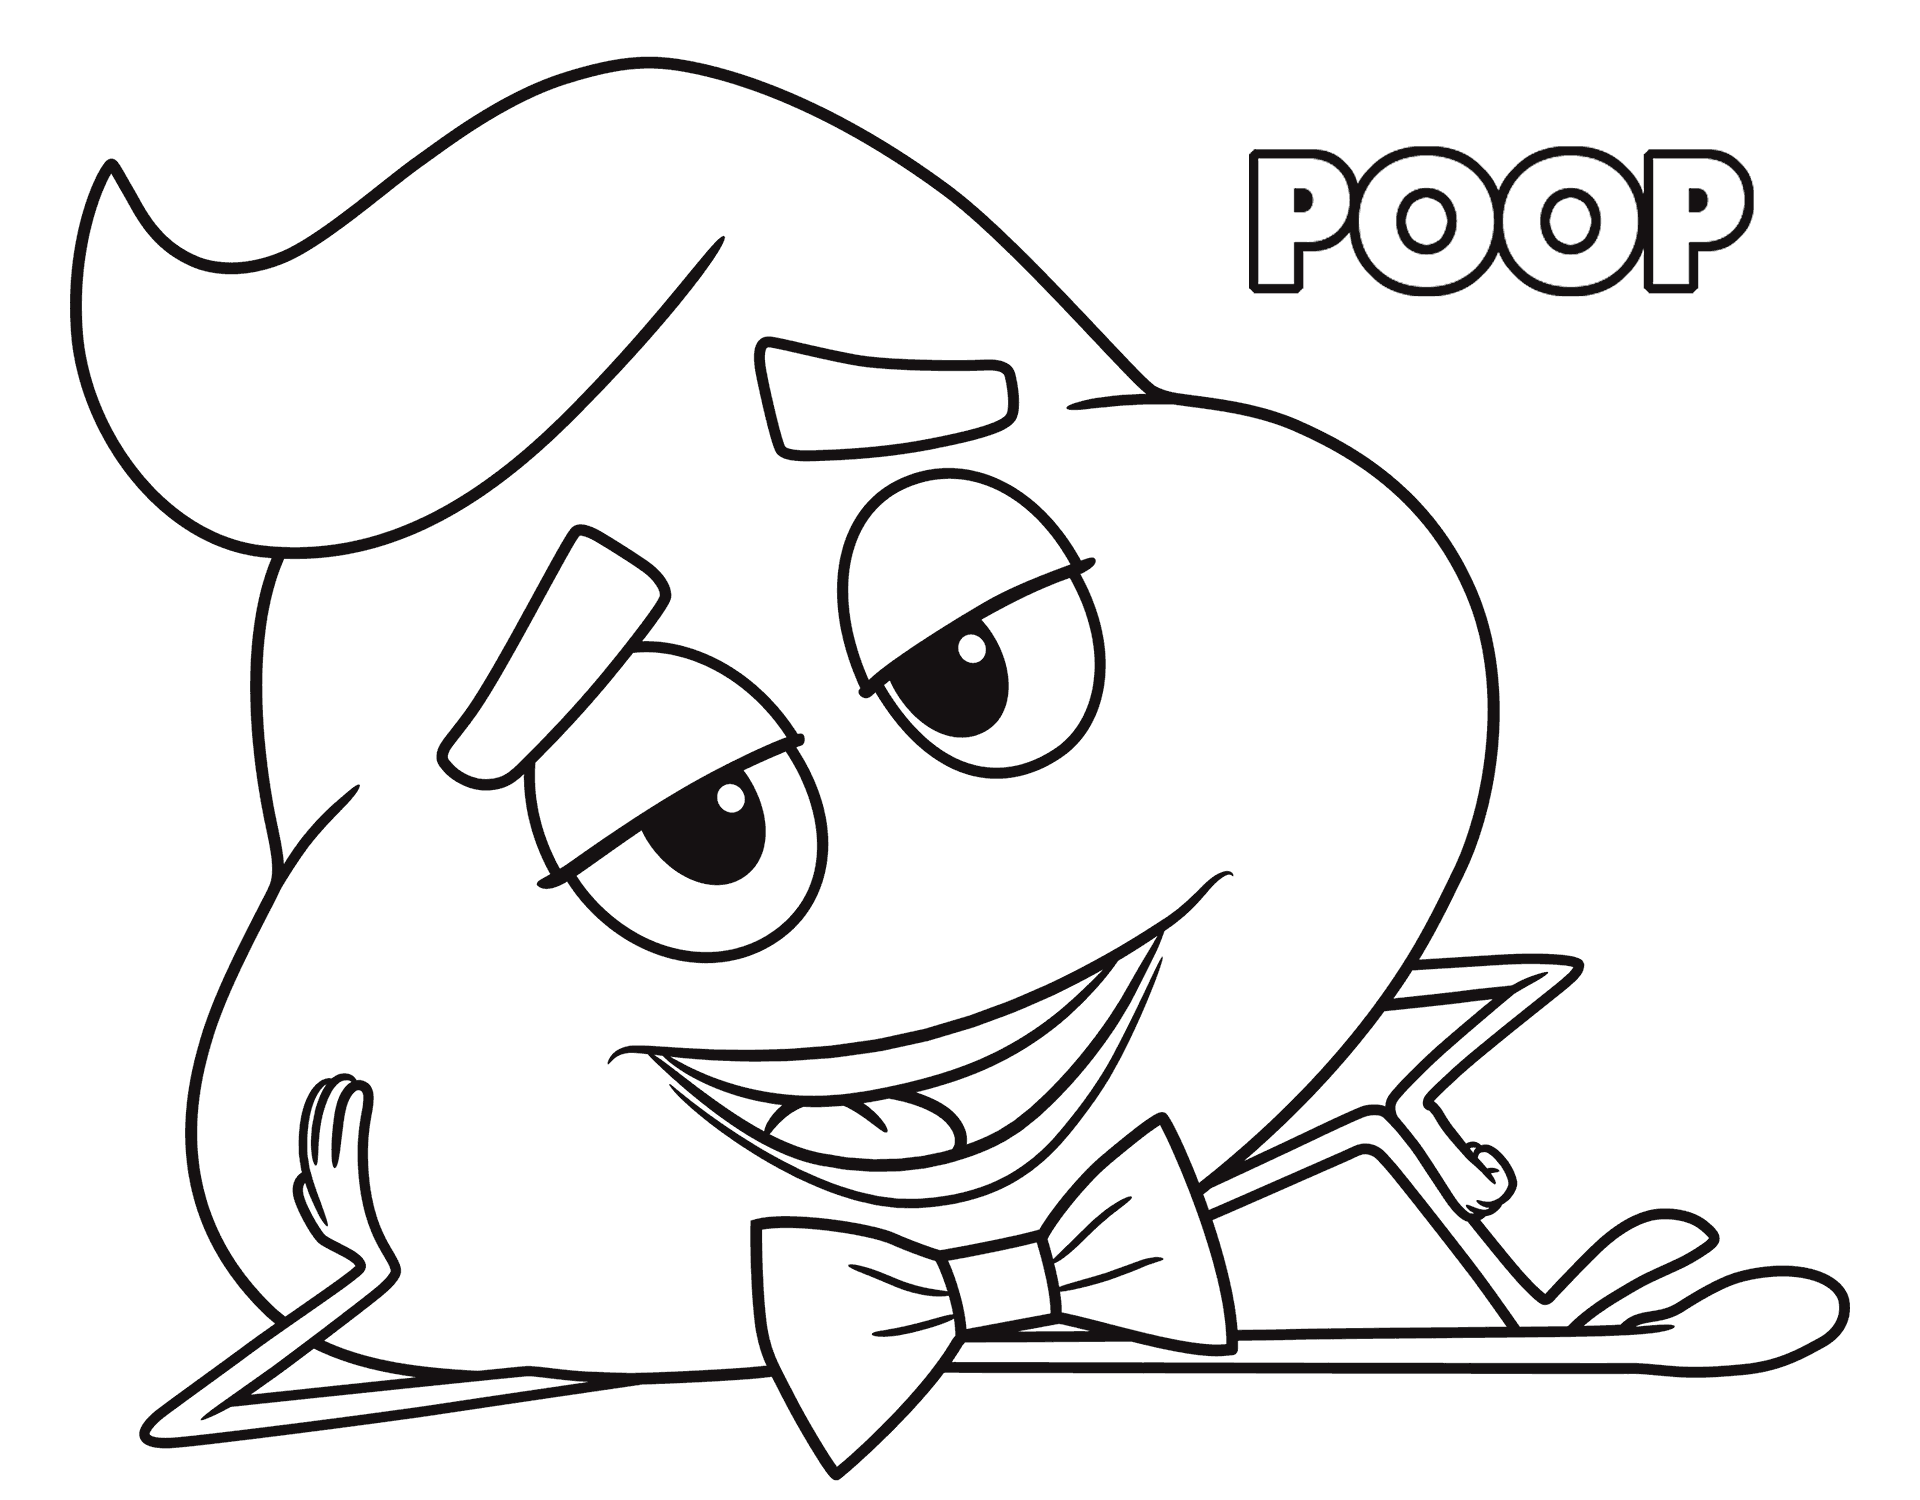 Printable coloring pages emoji coloring pages cartoon coloring pages coloring pages